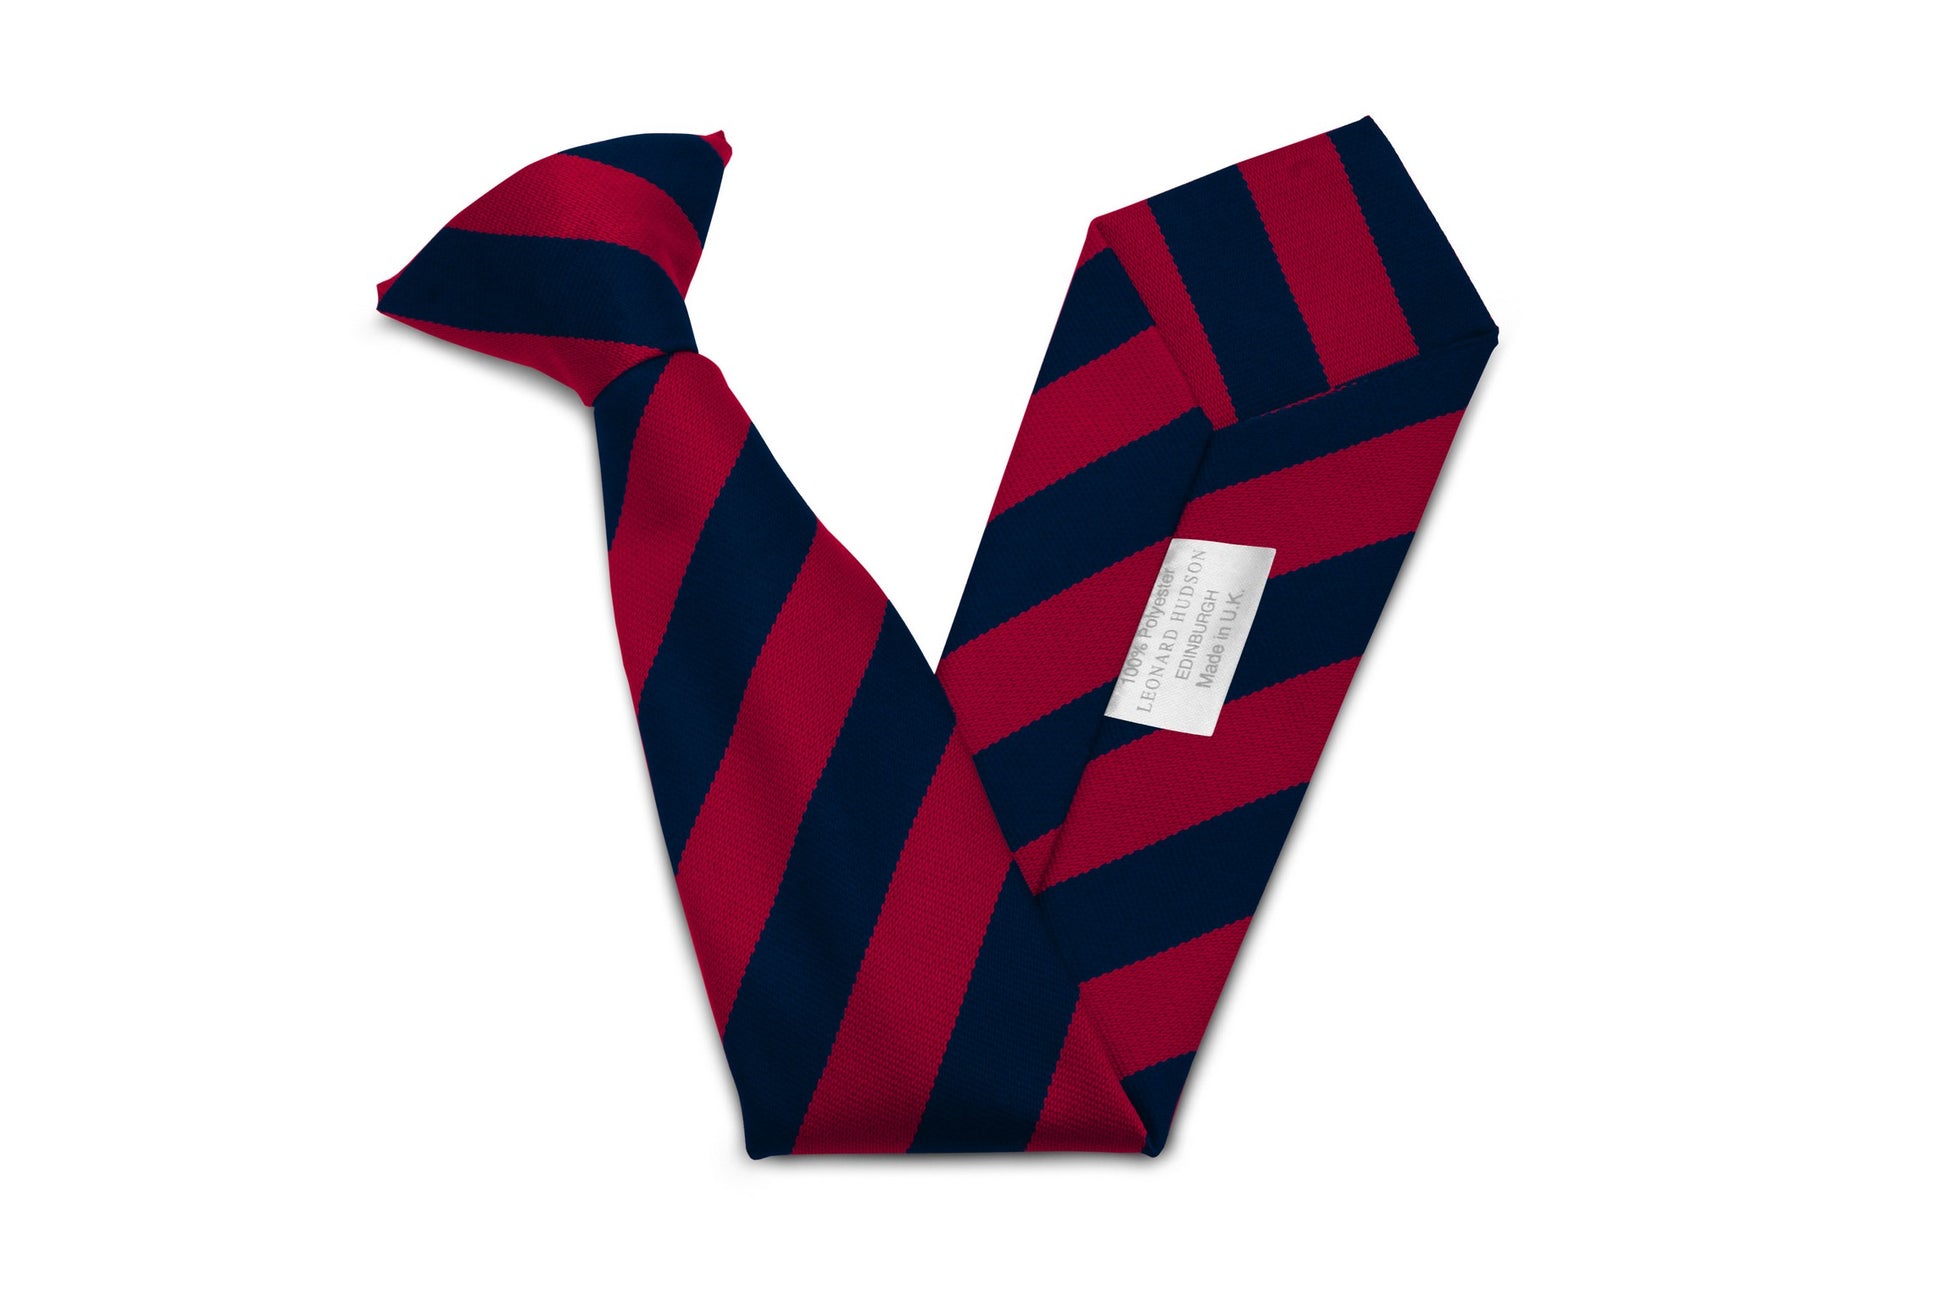 Stock Design Ties in Navy and Red Equal Stripe (5404-9504) - Lynendo Trade Store